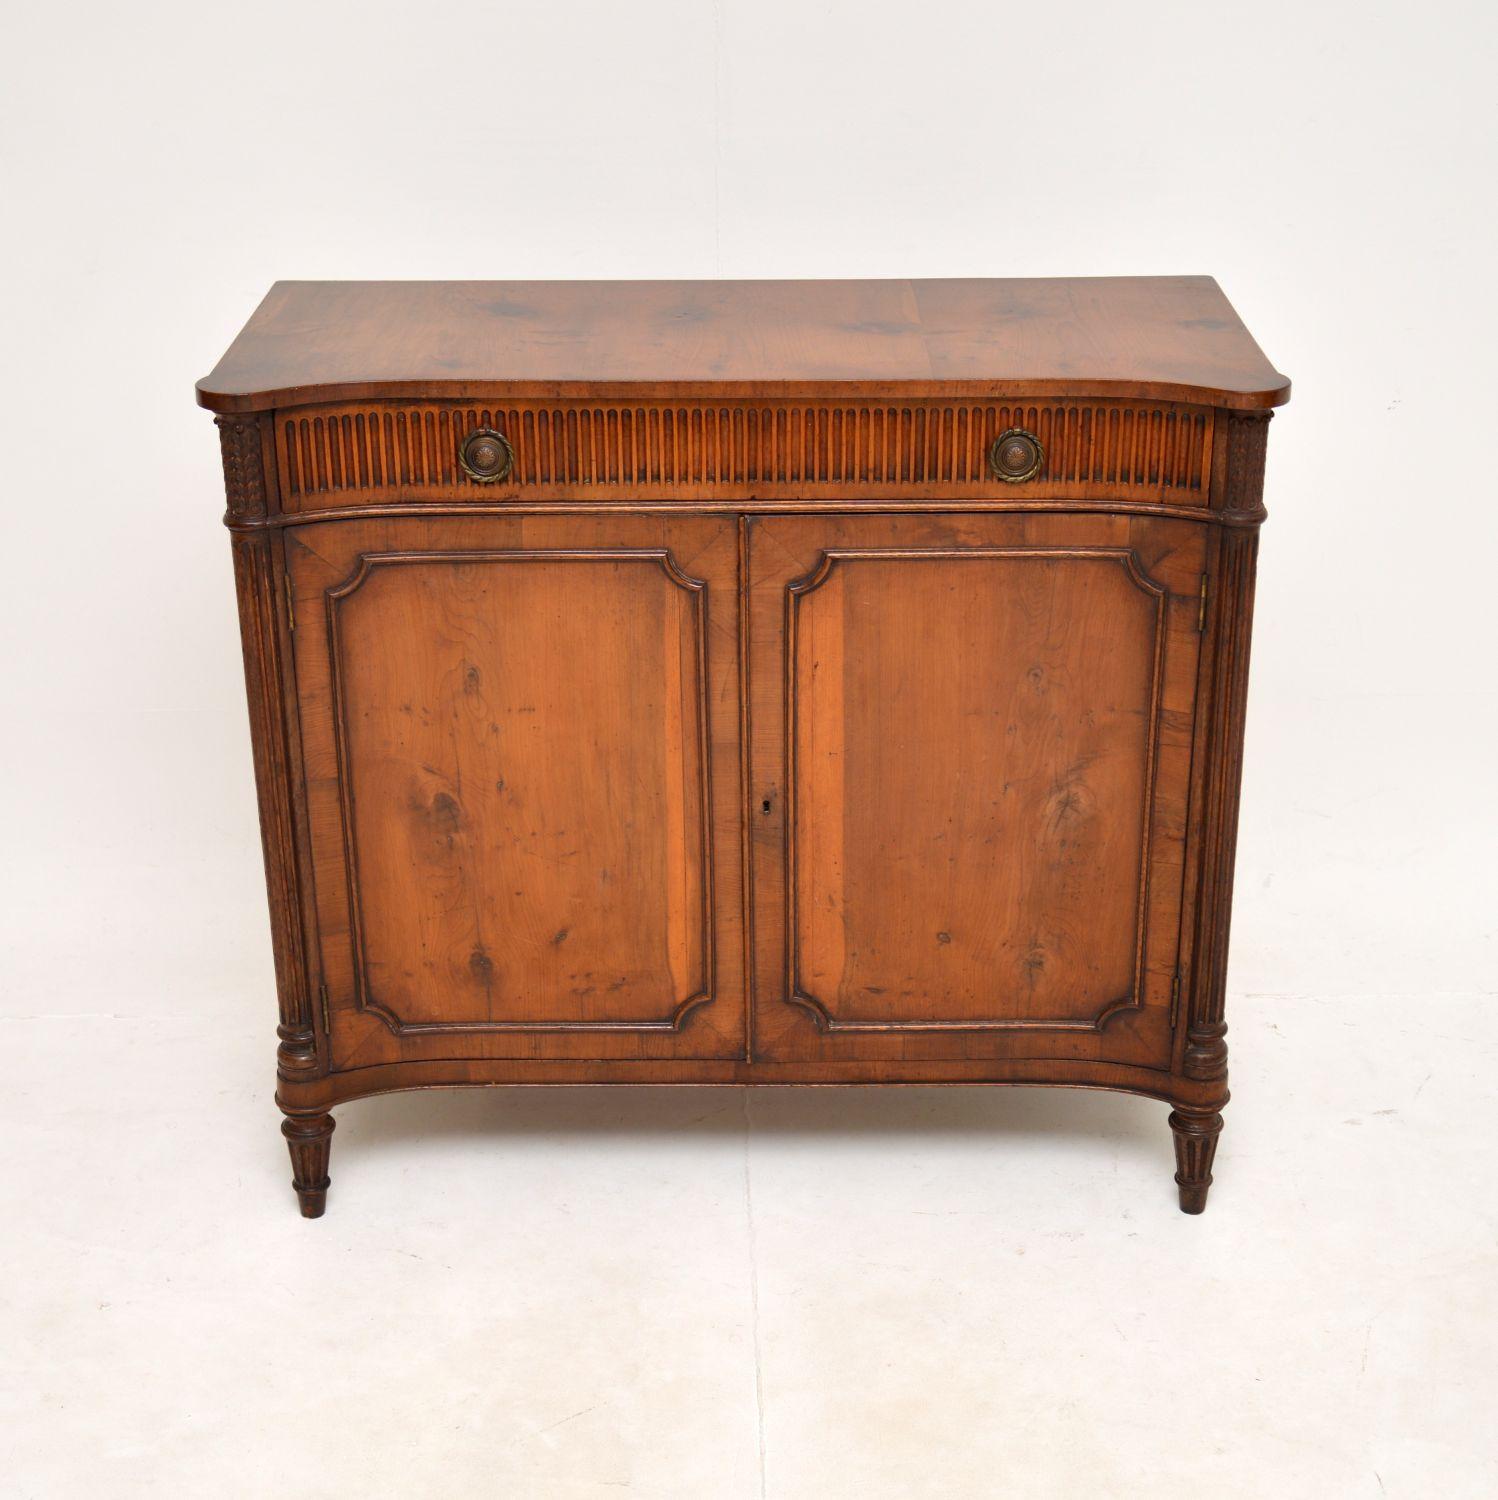 A beautiful antique Regency Style period yew wood cabinet. This was made in England, it dates from around the 1920’s period.

The quality is outstanding, this is very well made and is also a very useful size. The two panelled doors contain a cabinet